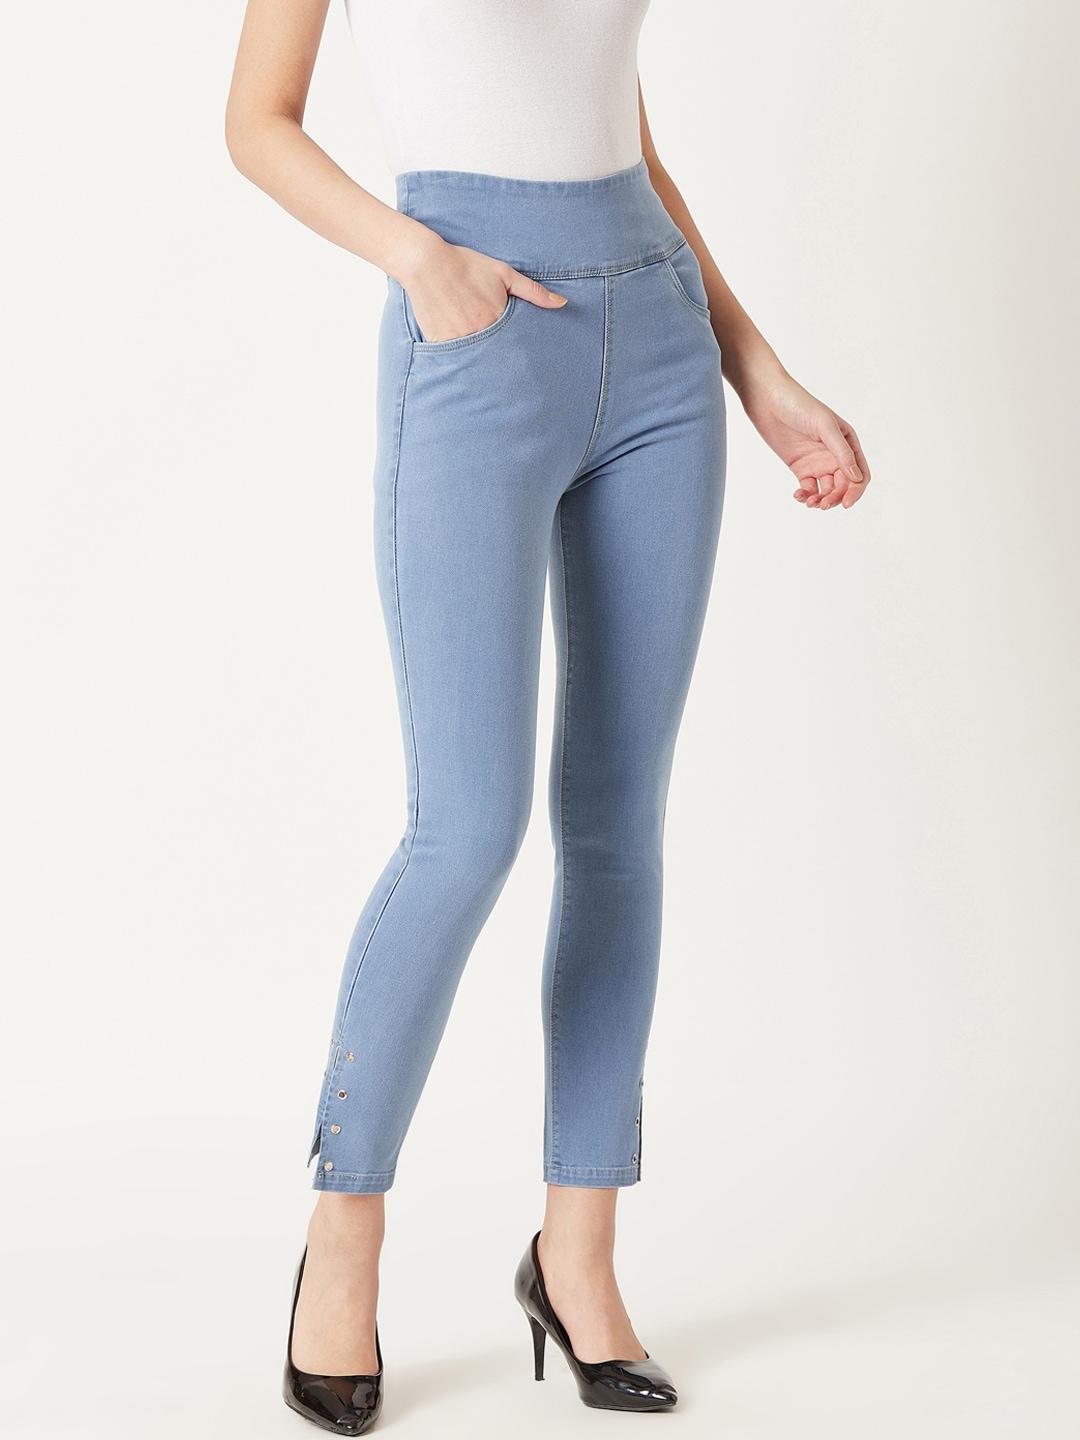 miss-chase-women-blue-the-way-i-am-denim-jeggings